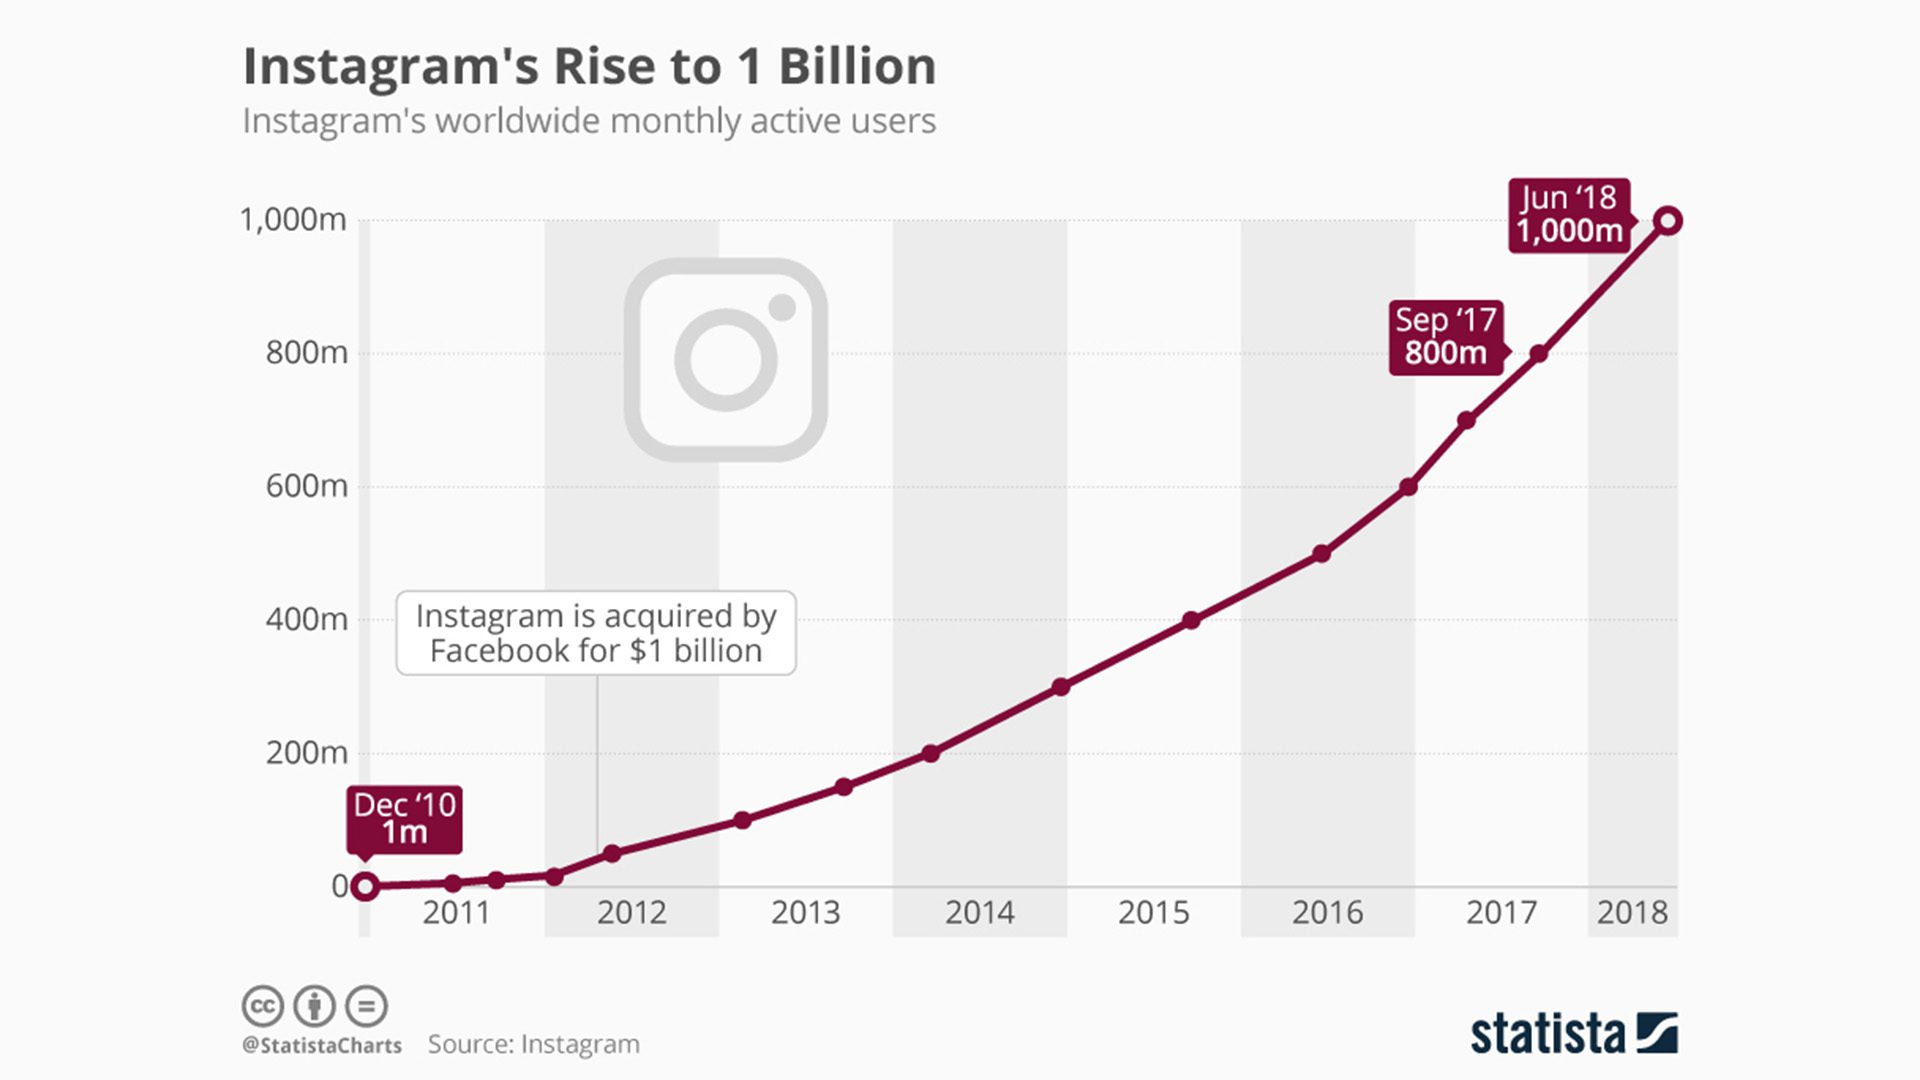 Instagram's quick rise to 1 Billion users